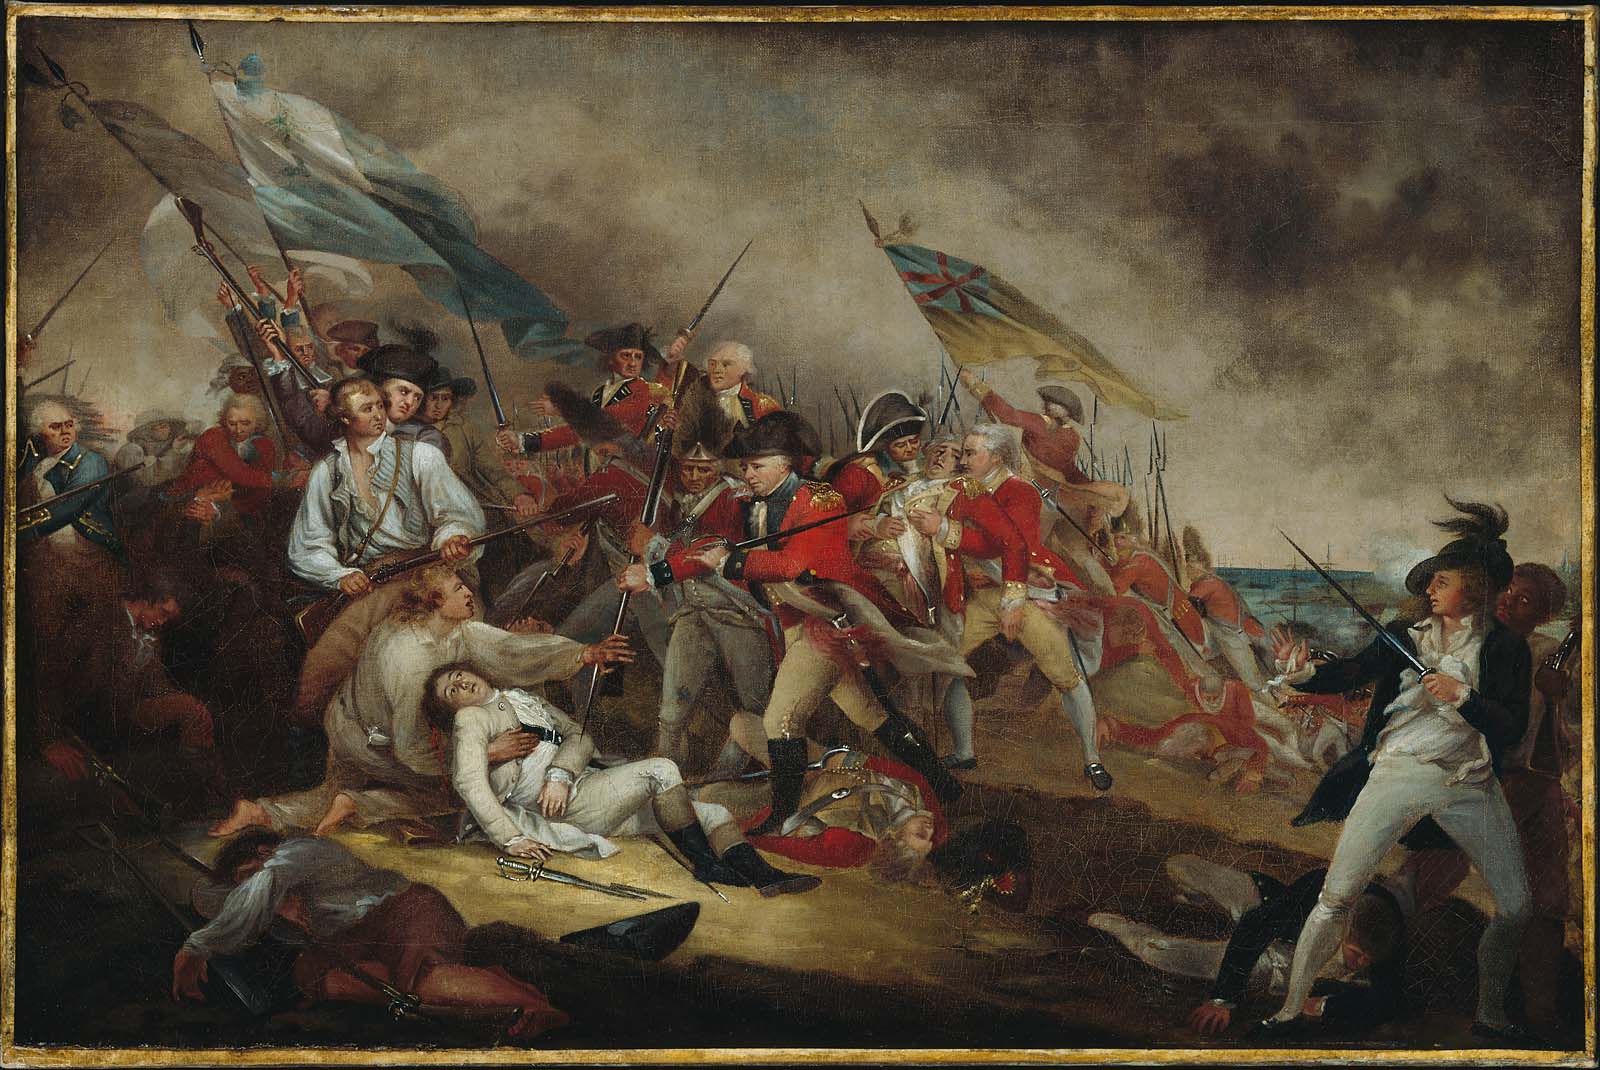 The Death of General Warren at the Battle of Bunker's Hill, 17 June, 1775